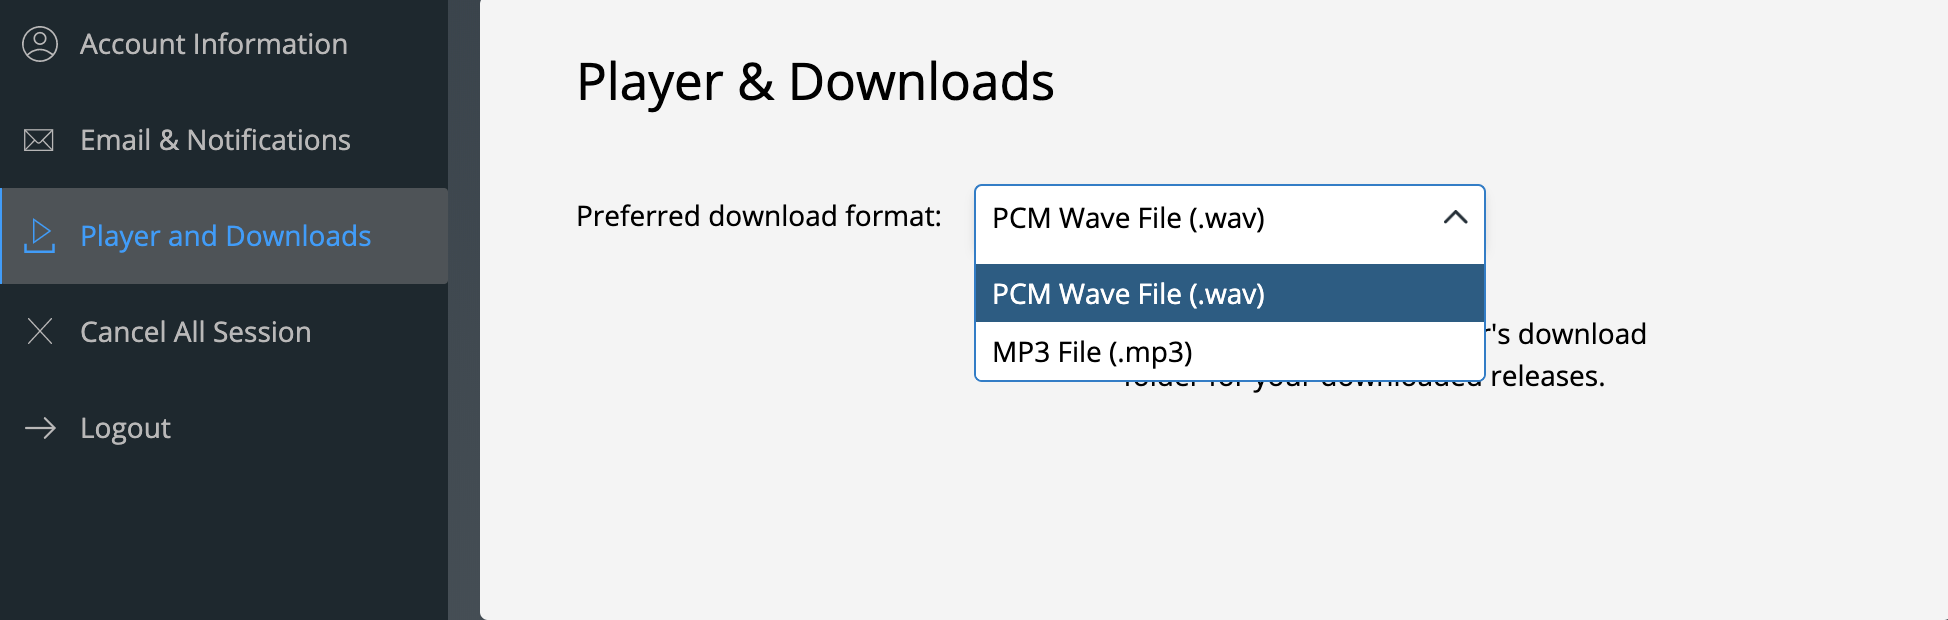 How do I change the download format?